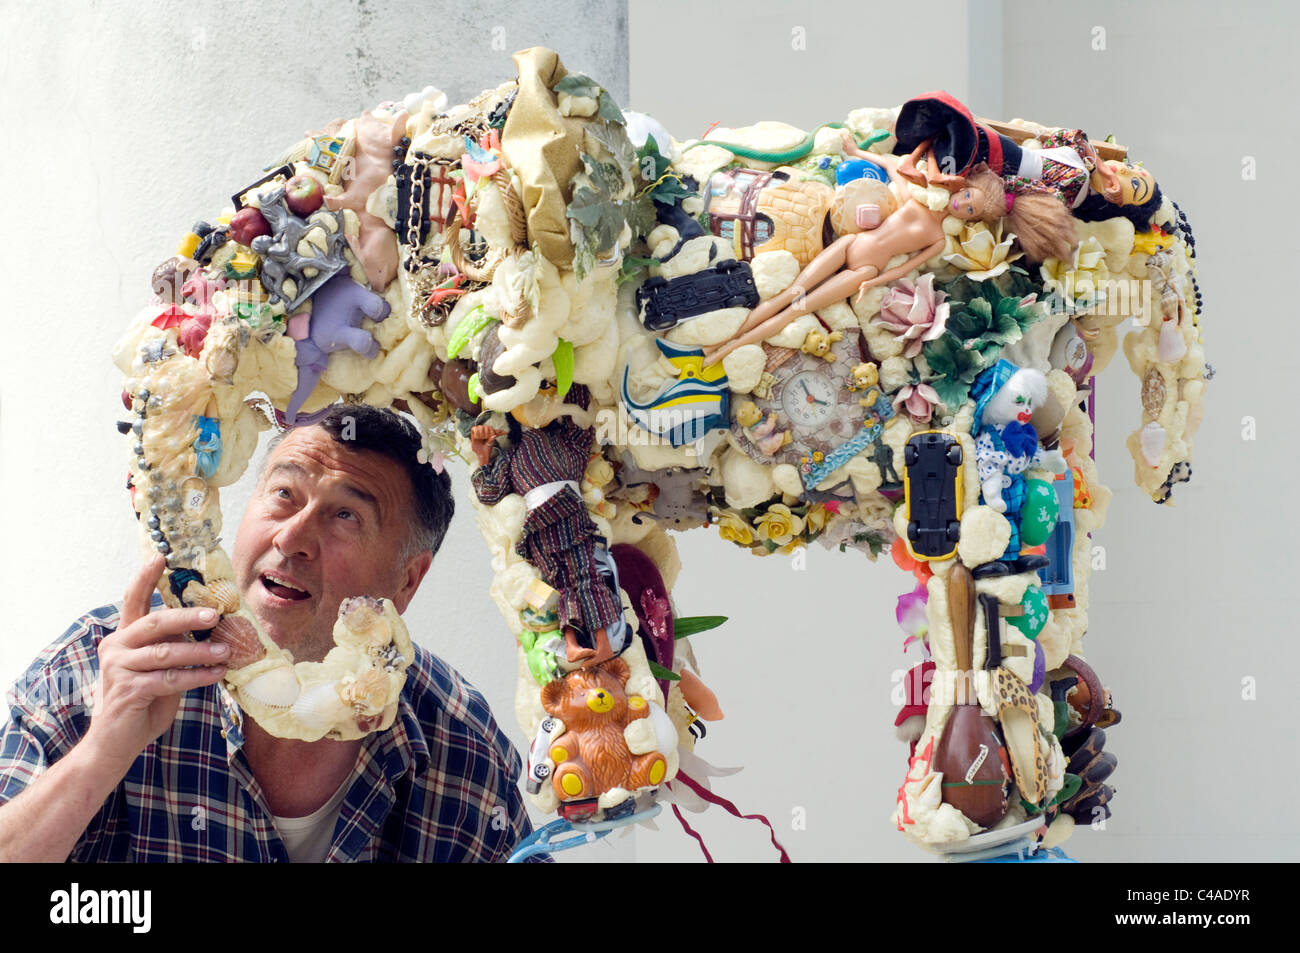 Sculptor Anthony Heywood and his sculpture 'Earth Elephant' made of recycled rubbish. Stock Photo